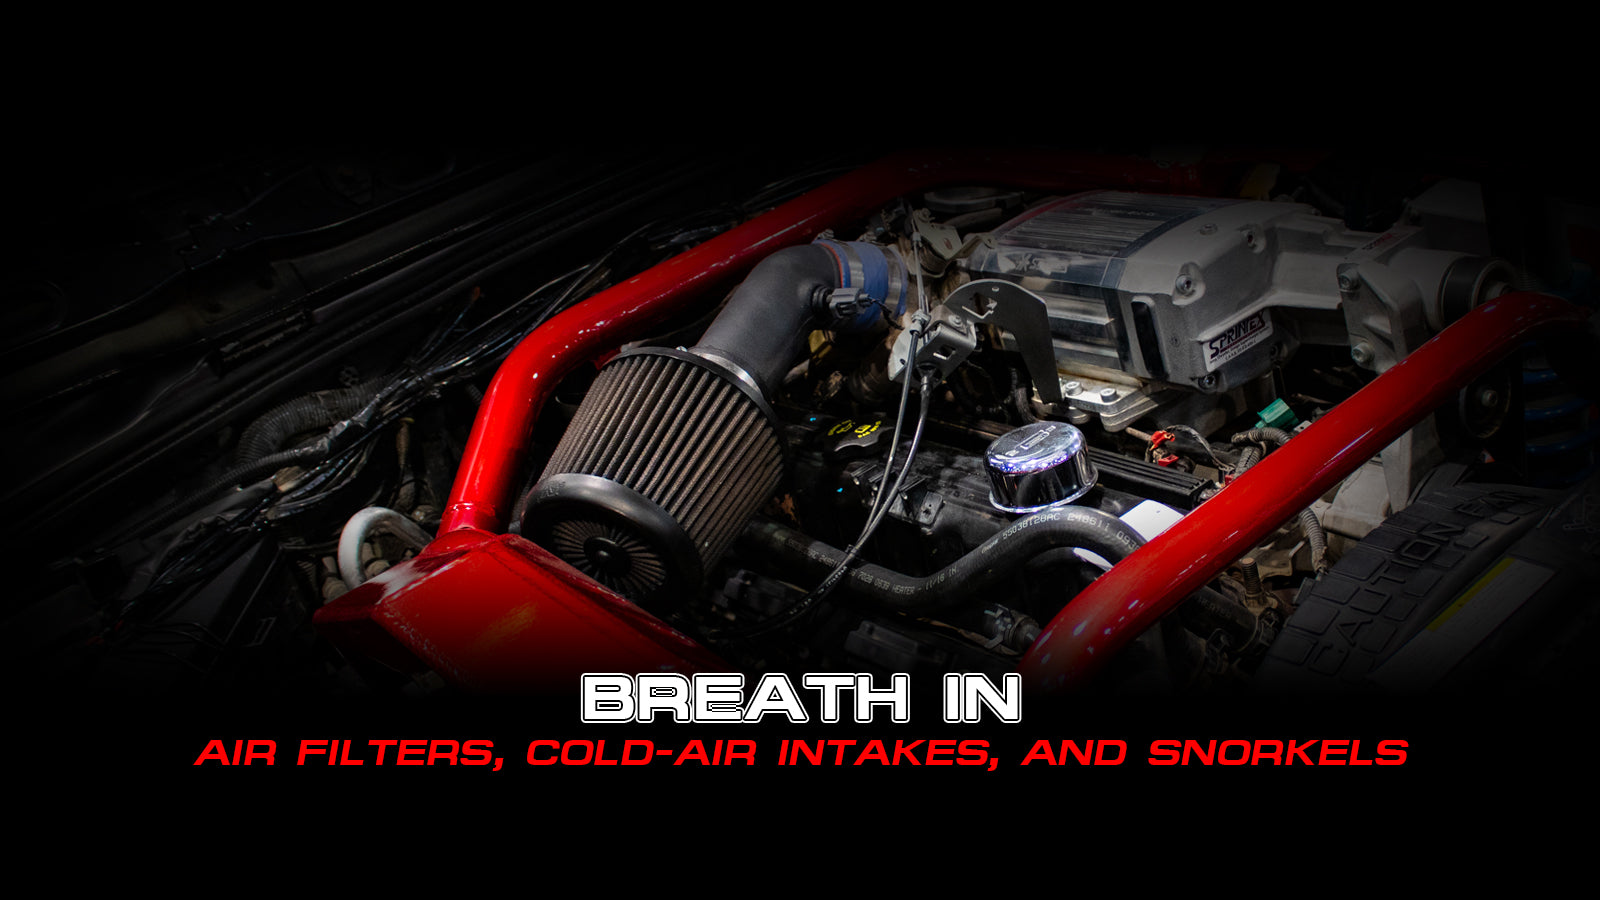 Breath In – Air Filters, Cold-Air Intakes, and Snorkels